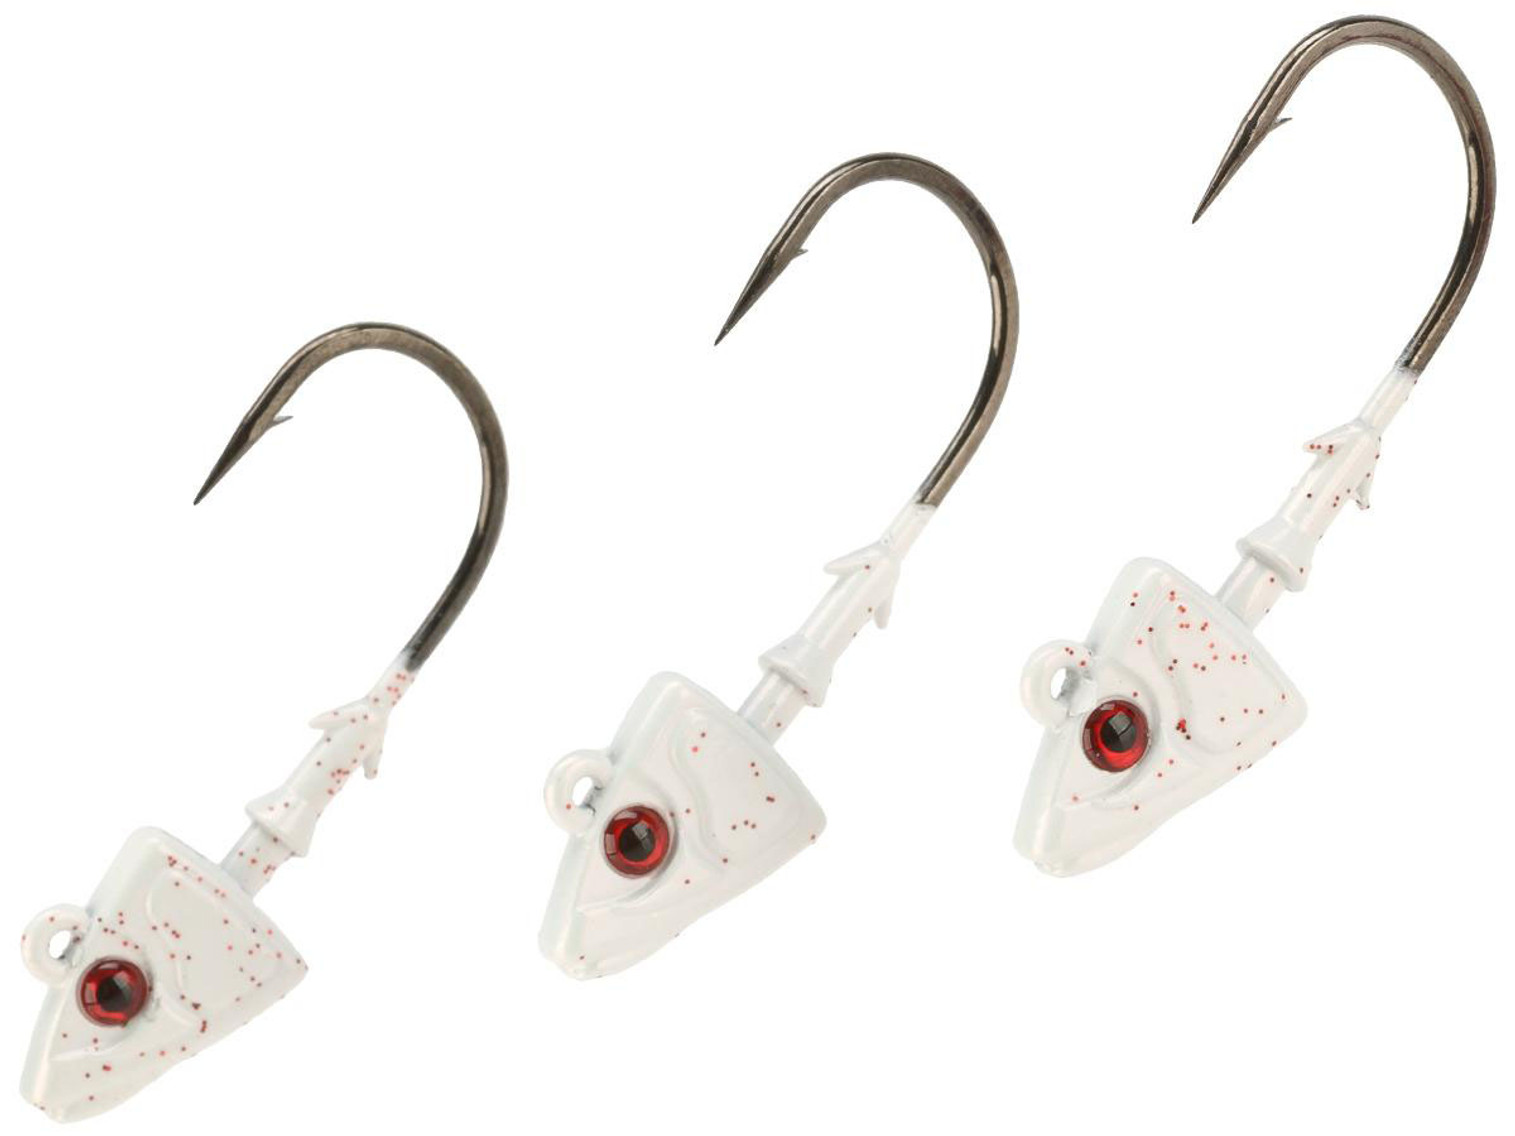 Mustad Shad/Darter Head 3/8 OZ 2X Strong - Pack of 3 (Color: Pearl UV with Red Eyes / Size 3/0)